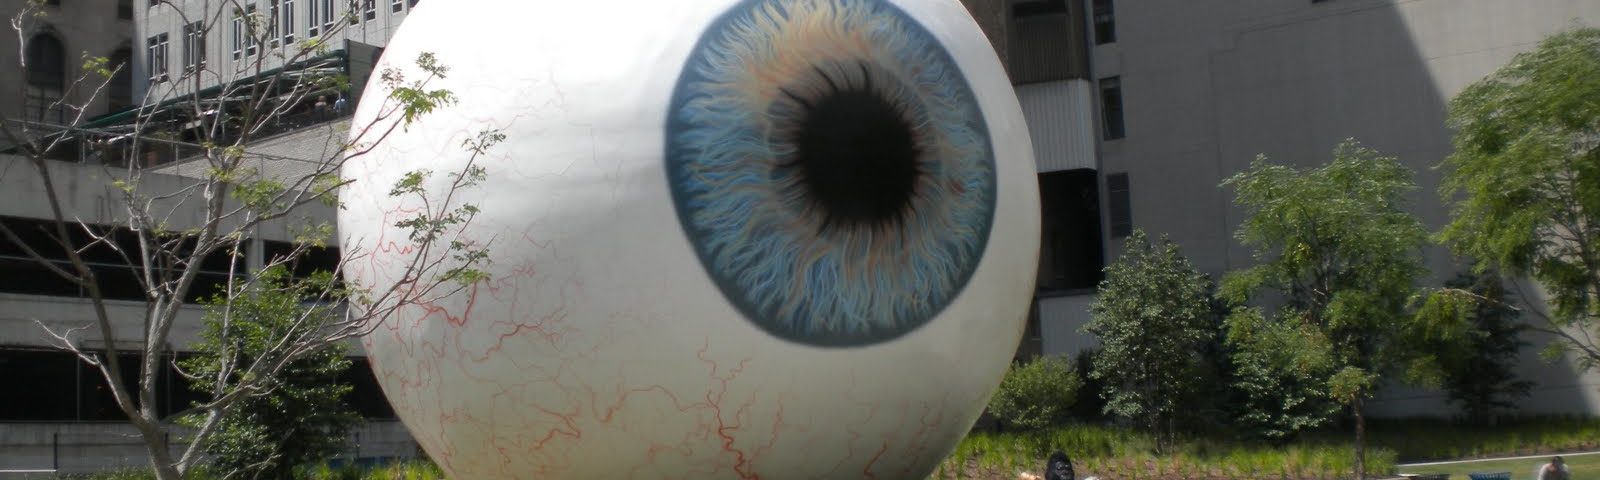 Attractions in United States of America eye ball in chicago